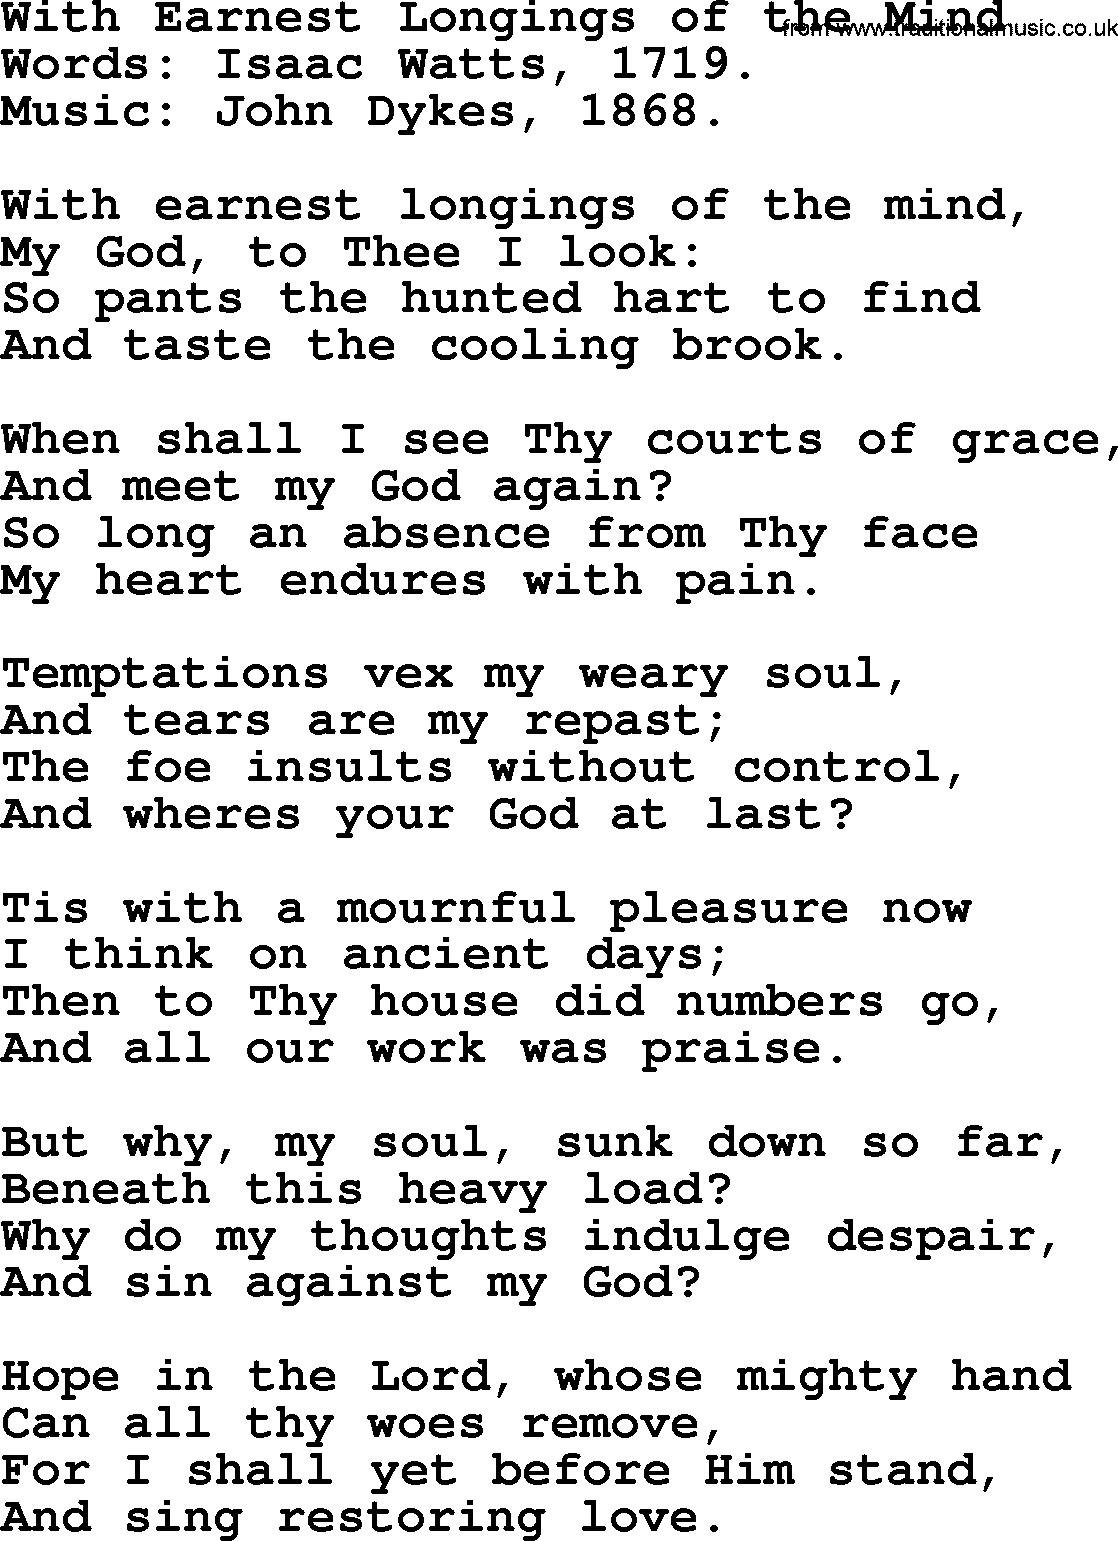 Isaac Watts Christian hymn: With Earnest Longings of the Mind- lyricss